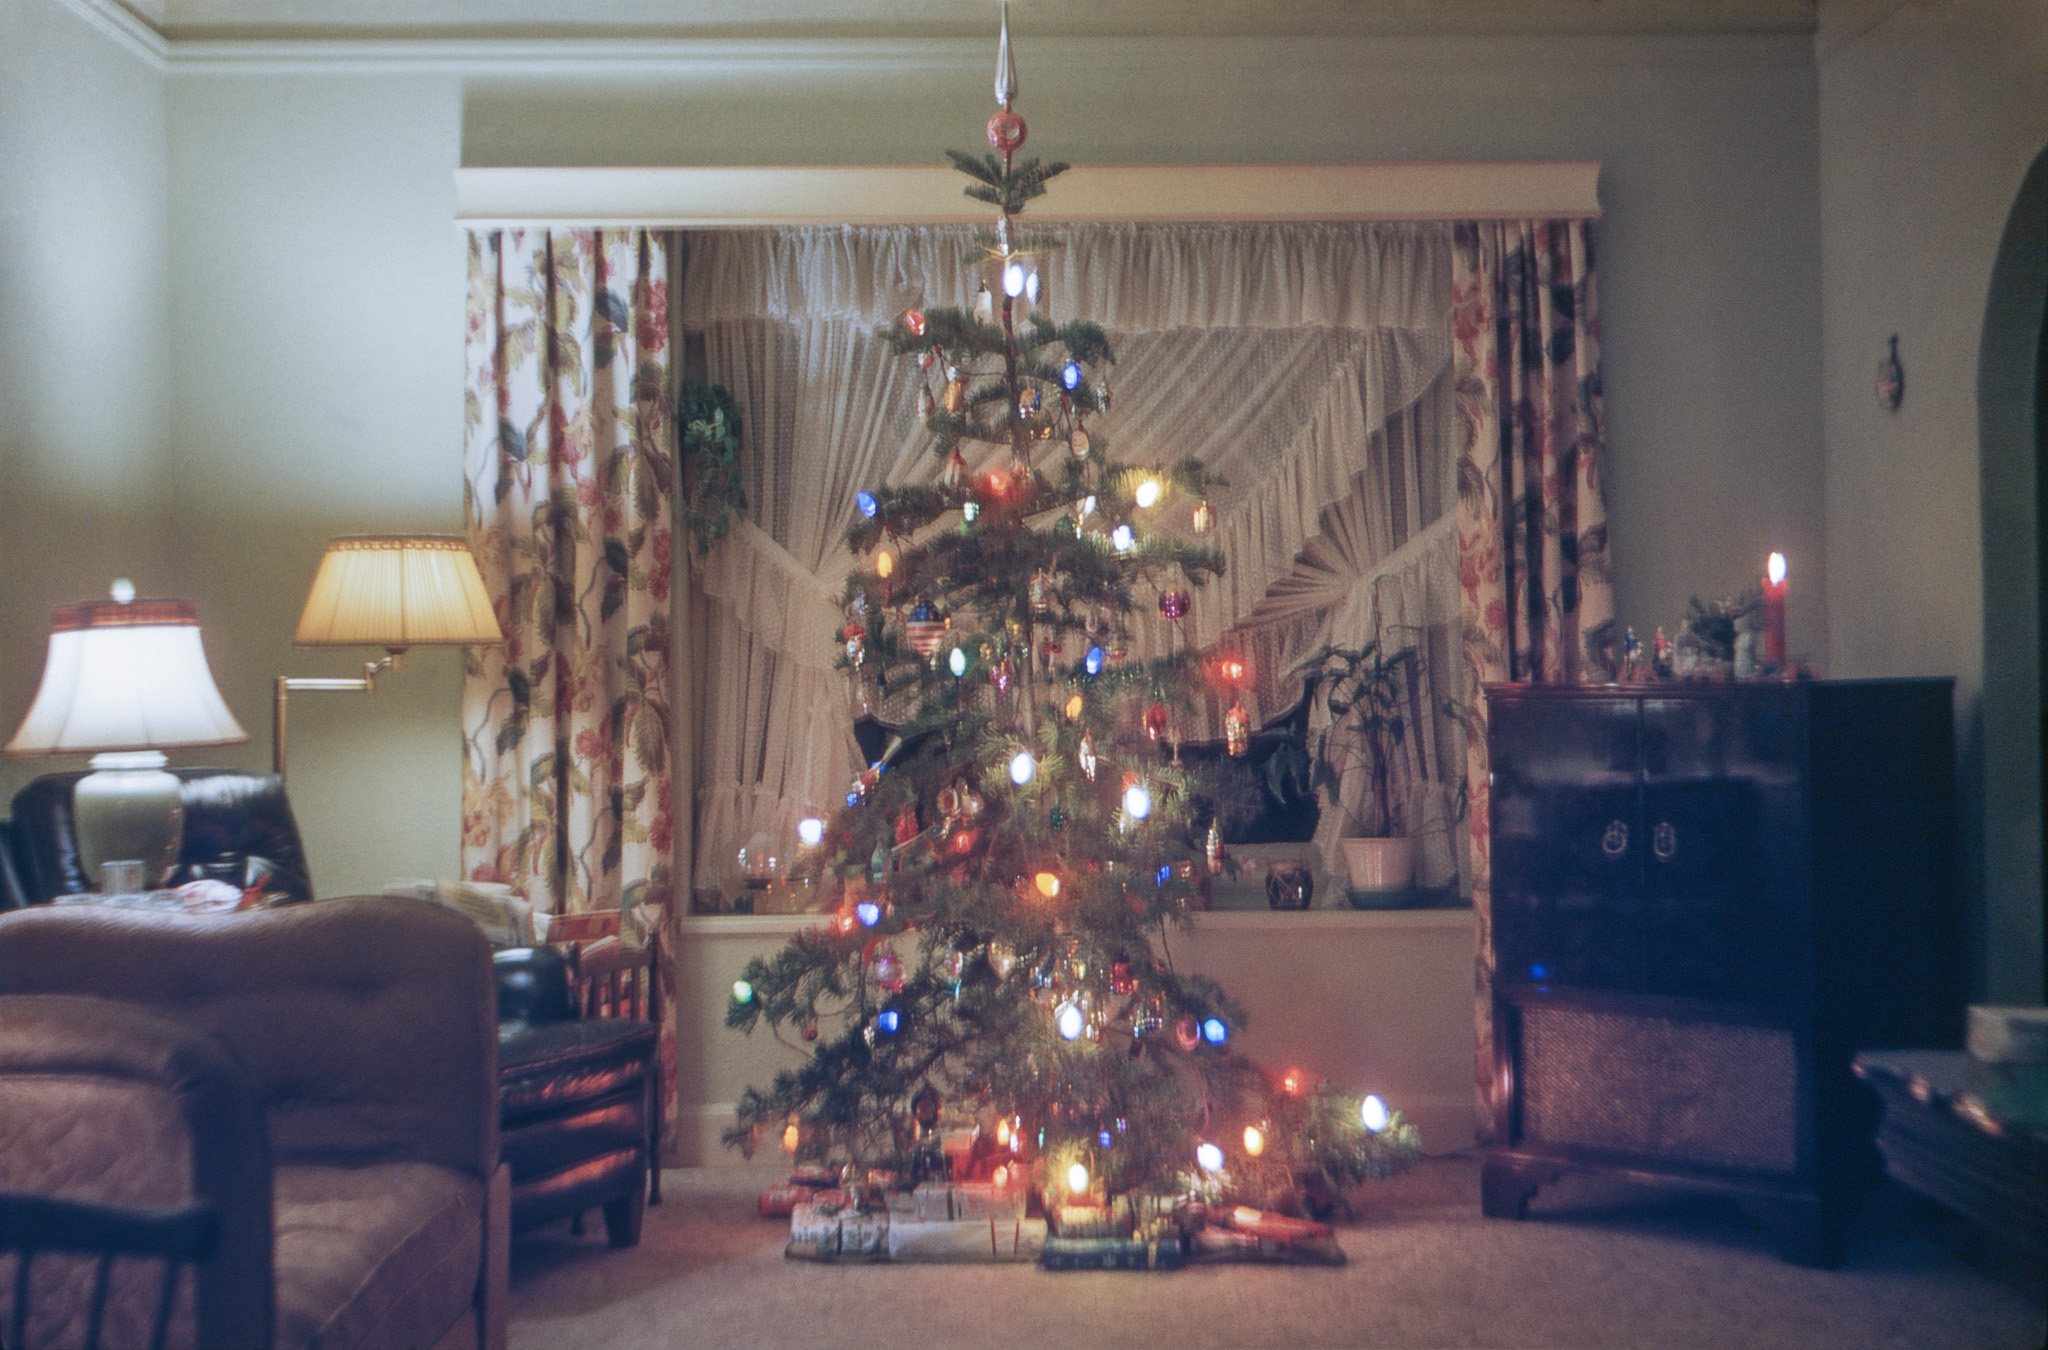 December 1955. Here's our family's entry in the Shorpy Christmas tree sweepstakes. Devoid of any jolly celebrants, unfortunately, but at least we have my mother's curtains and drapes. Many vintage ornaments are in evidence: Santa heads, houses, a table lamp, a mushroom, an angel, a prizefighter, some birds with spun glass or celluloid tailfeathers, and one of my personal favorites, a big one we always called "the stars and stripes forever" on the left a little more than halfway up. Some were from my Mother's family and dated back to the early 1900s, including one that still had wax drippings on it from when you actually lit your tree with candles. On the right, our Motorola hosts the Nativity scene complete with plastic Wise Men. Sharp-eyed observers may note that on the window seat, the fishbowl, vacant a year later, here appears to be inhabited. My brother recorded the available-light exposure details for this Kodachrome slide on the mount: f2.8 @ 1 second, during which he jiggled the camera slightly. View full size.